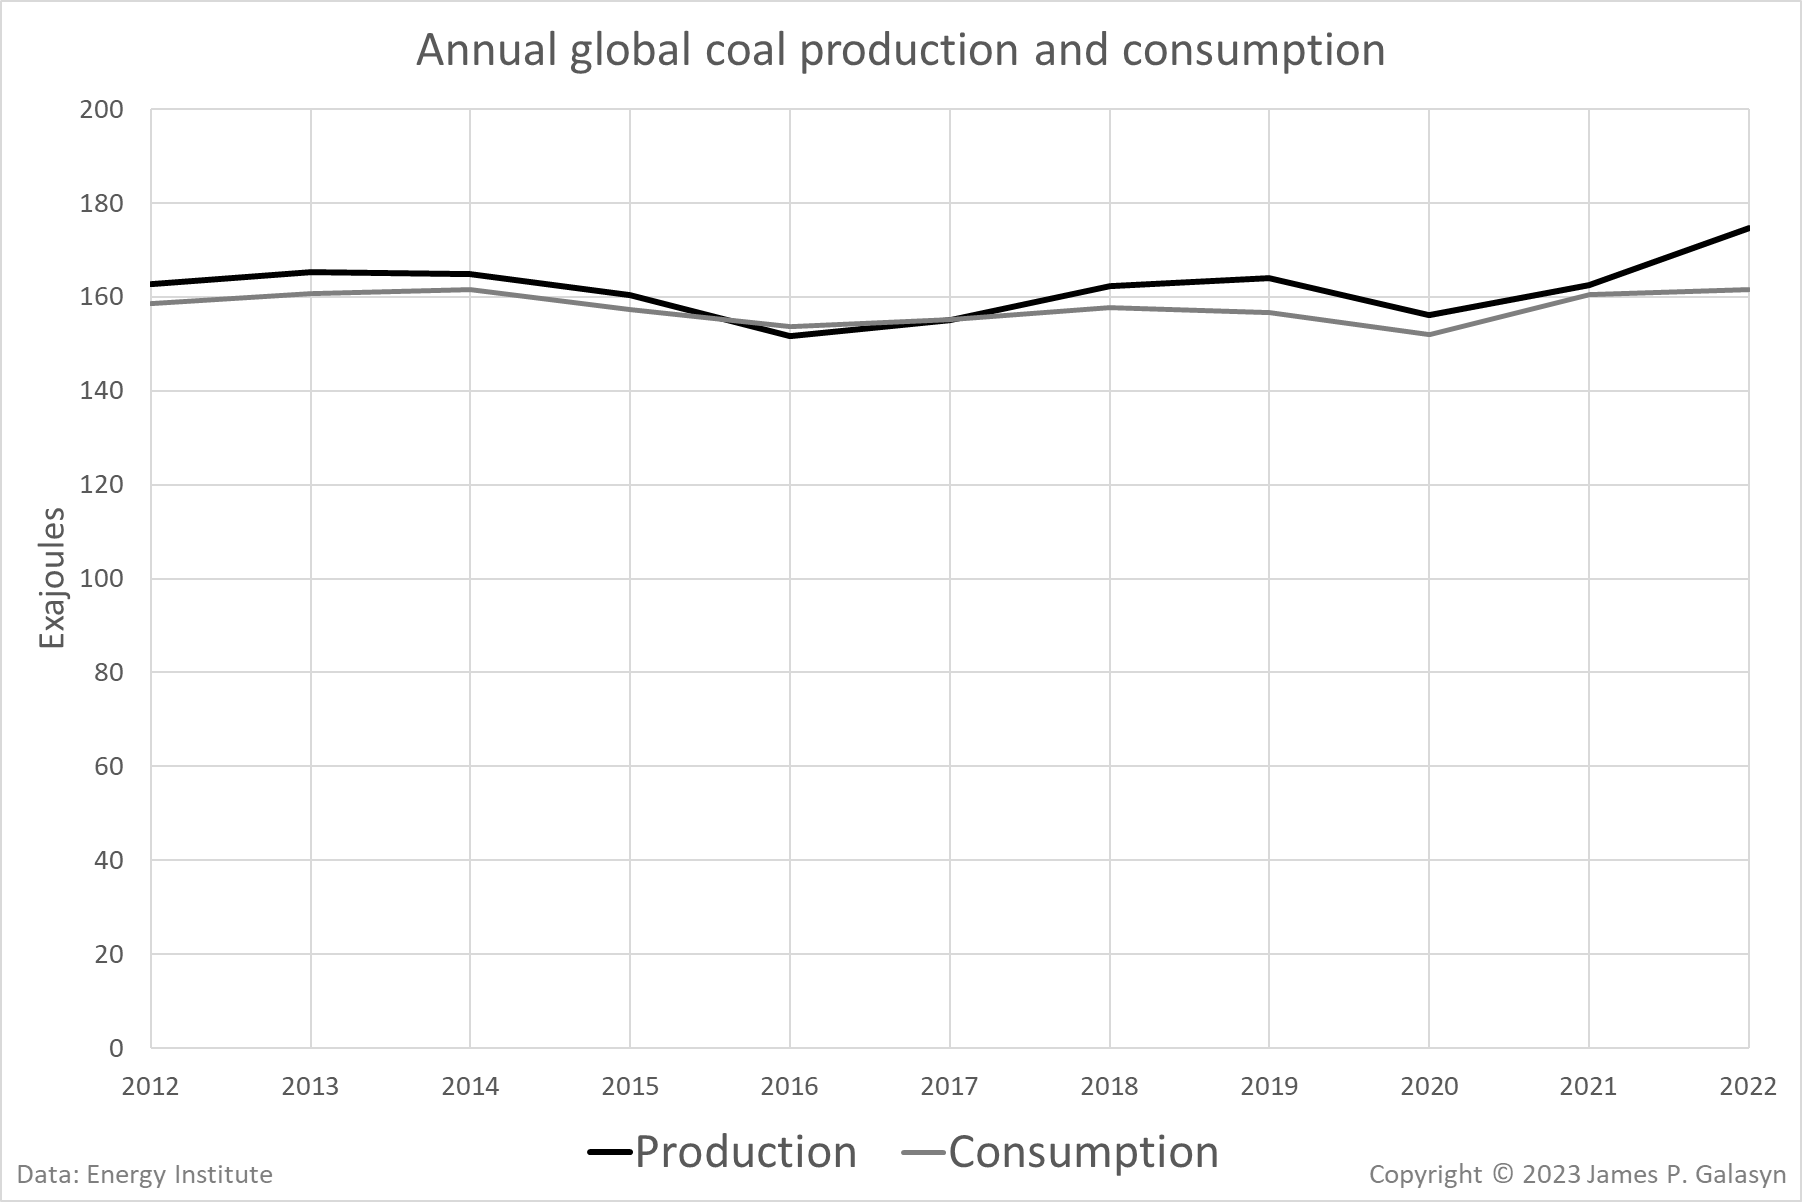 Annual global coal production and consumption, 2012-2022. In 2022, coal consumption continued to increase, rising 0.6 percent on 2021 to 161 EJ; the highest level of coal consumption since 2014. The growth in demand was largely driven by China (1 percent) and India (4 percent). Their combined growth of 1.7 EJ was sufficient to offset declines in other regions by 0.6 EJ. Coal consumption in both North America and Europe declined by 6.8 percent and 3.1 percent respectively. In 2022, OECD consumption was around 10 percent less than its 2019 pre-COVID level and non-OECD coal consumption over 6 percent higher. Global coal production increased by over 7 percent compared to 2021, reaching a record high of 175 EJ. China, India, and Indonesia accounted for over 95 percent of the increase in global production. Data: Energy Institute. Graphic: James P. Galasyn